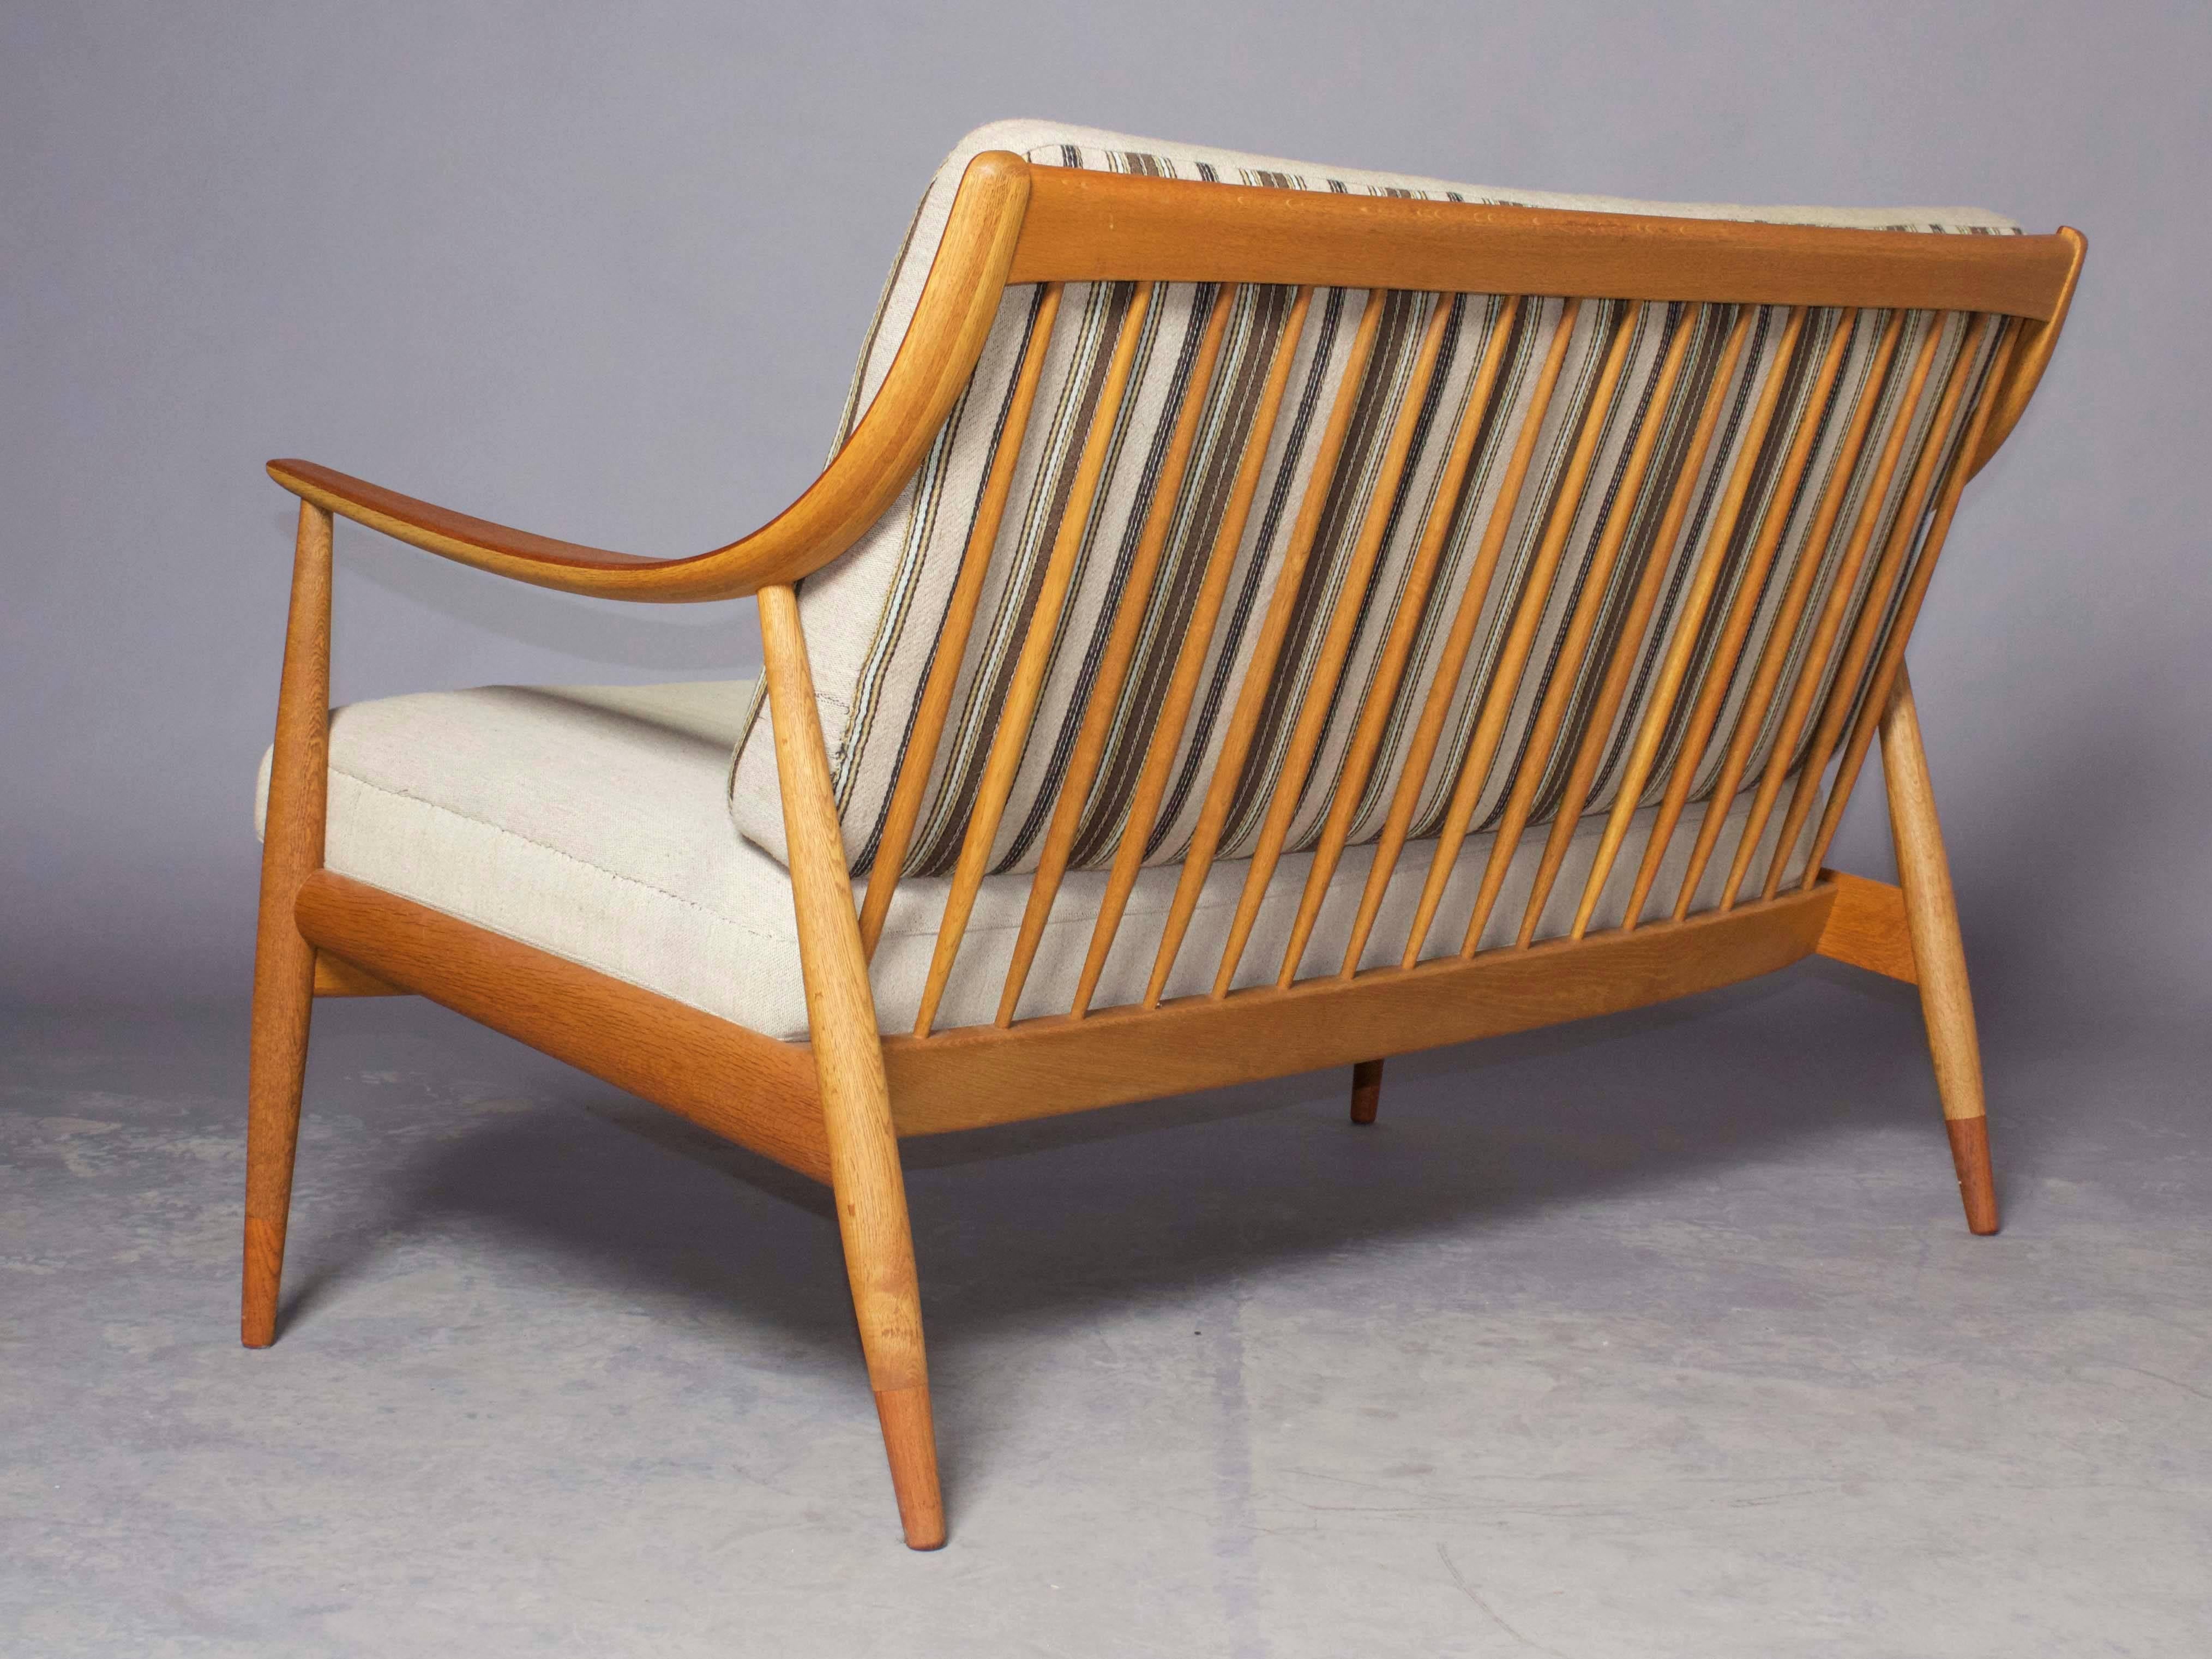 Scandinavian Modern Love Seat #147 by Hvidt and Molgaard for France & Sons